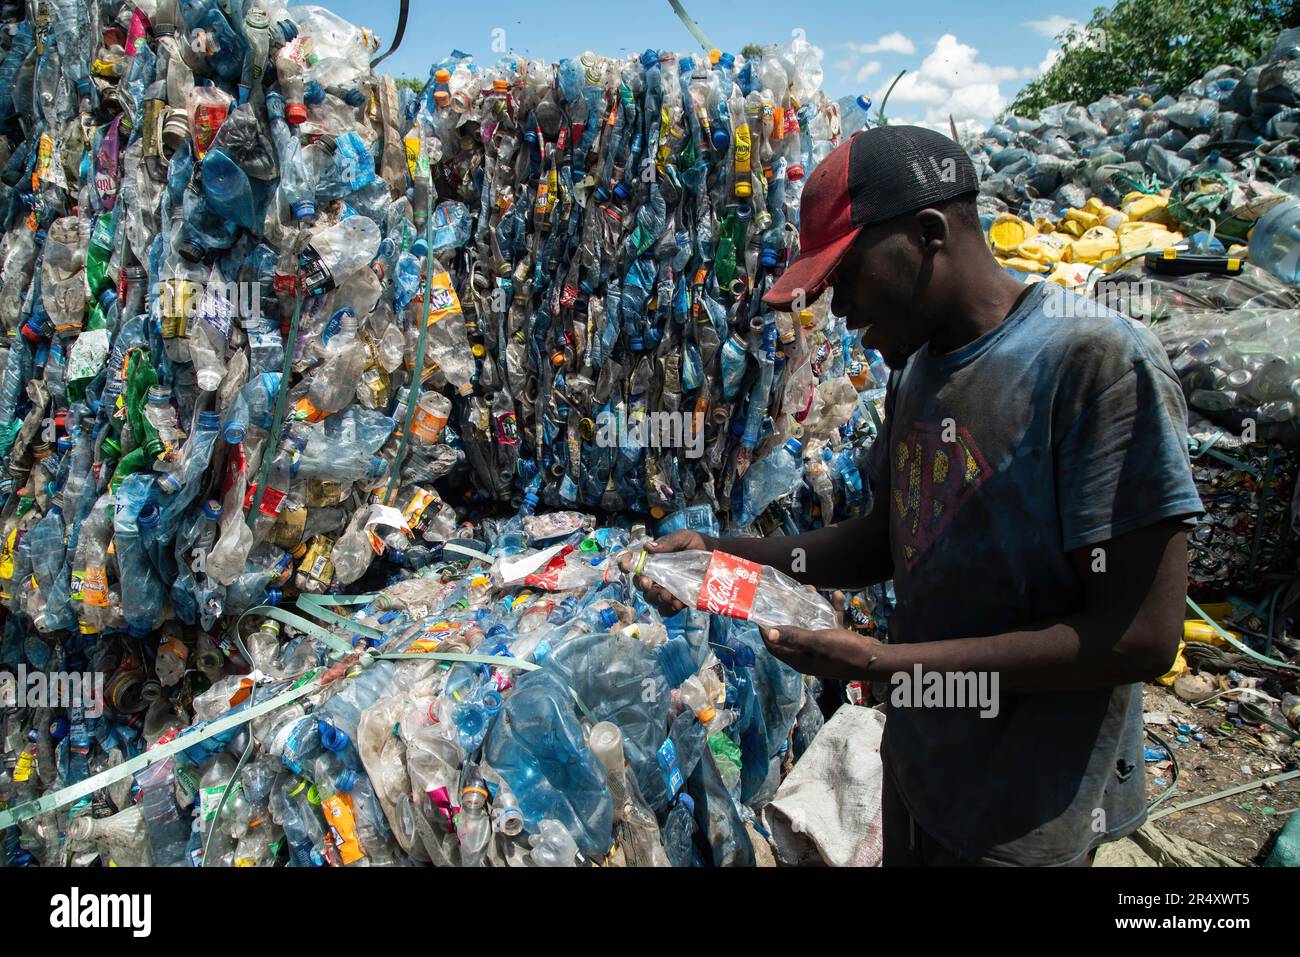 A worker is seen at a recycling plant in Nakuru. Negotiators have gathered in Paris, France for the second round of deliberations to develop a global treaty aimed at tackling the escalating issue of plastic pollution. According to a recent report by the United Nations Environment Programme (UNEP), countries have the potential to reduce plastic pollution by 80% by 2040 by eliminating unnecessary plastics, implementing recycling and reuse strategies, introducing deposit return schemes, and substituting plastic with sustainable alternative materials. (Photo by James Wakibia/SOPA Images/Sipa USA Stock Photo